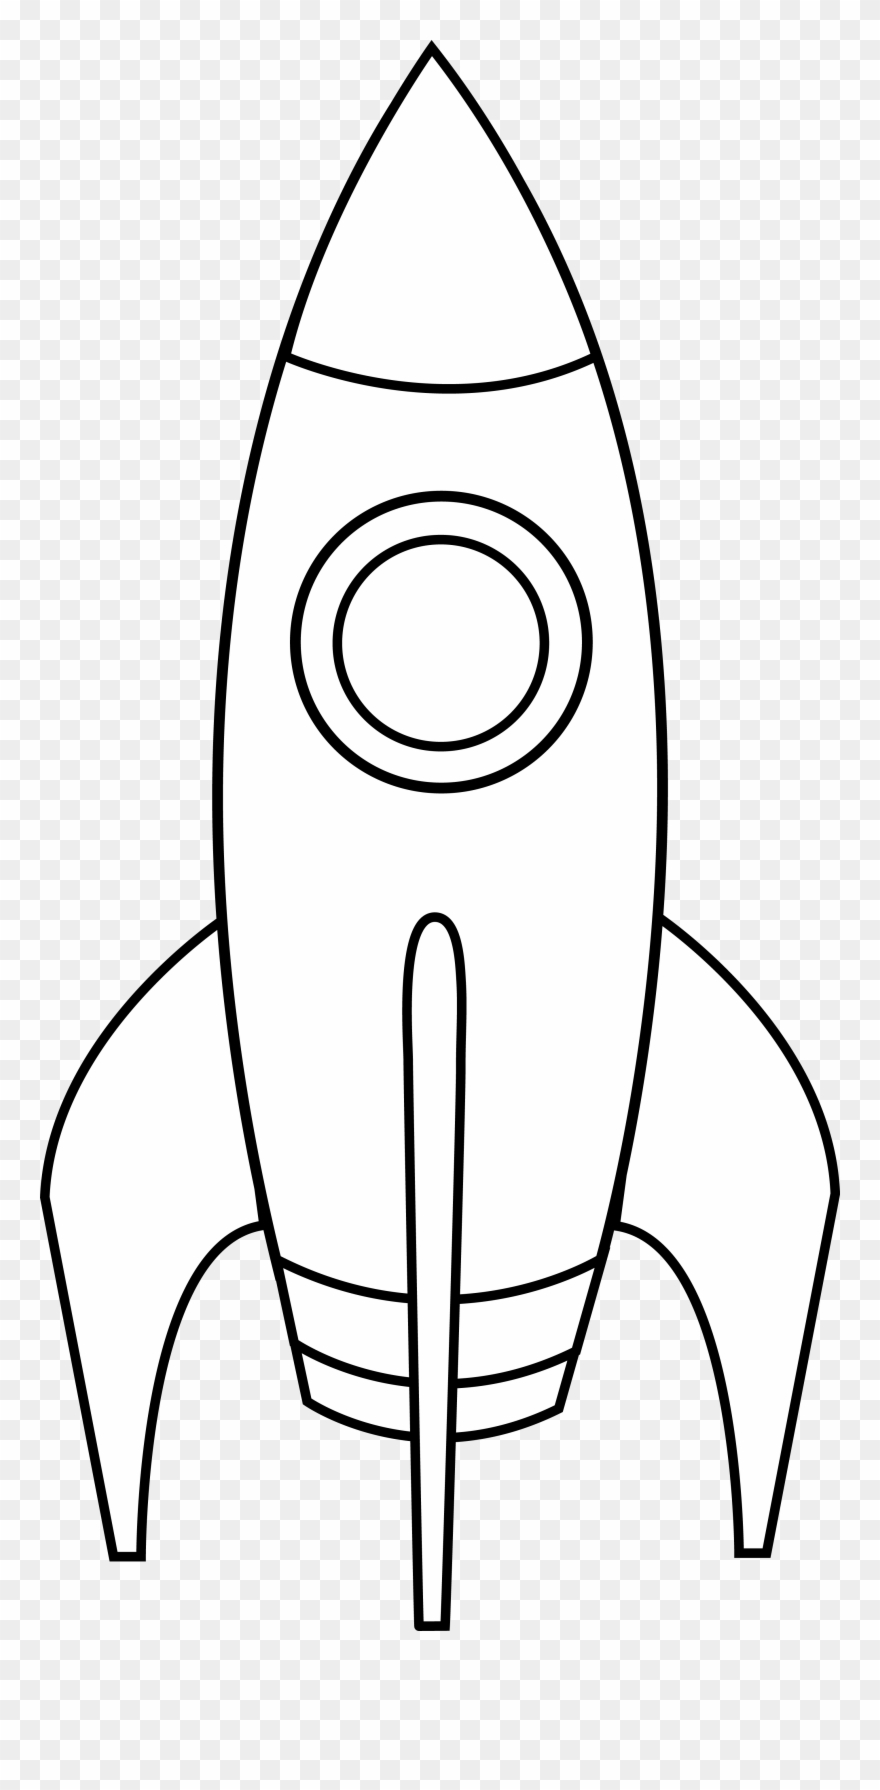 Rocket Ship Clipart Black And White Images Pictures.